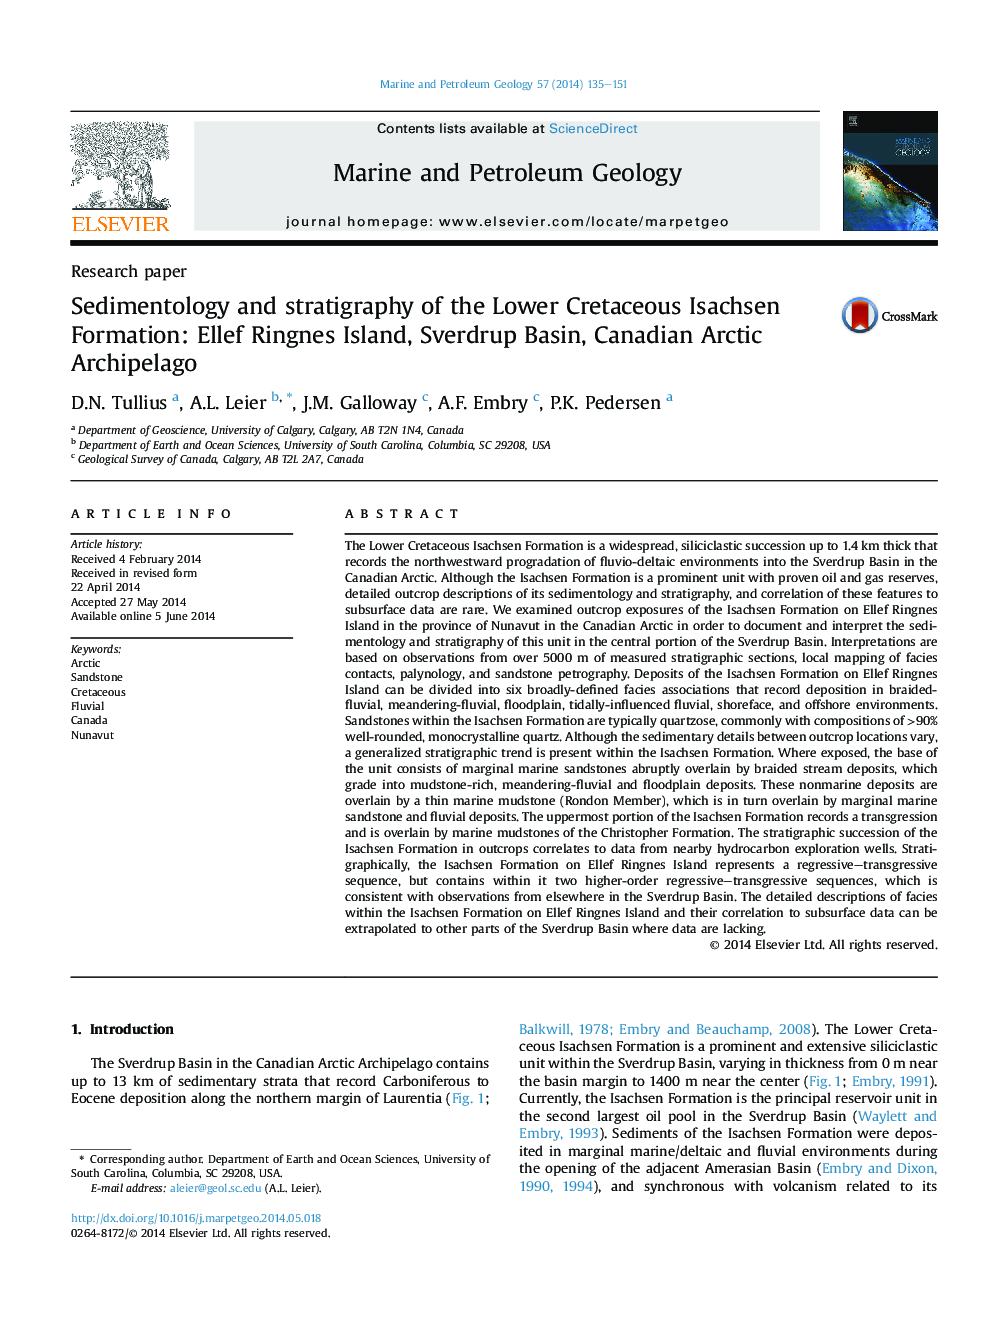 Research paperSedimentology and stratigraphy of the Lower Cretaceous Isachsen Formation: Ellef Ringnes Island, Sverdrup Basin, Canadian Arctic Archipelago